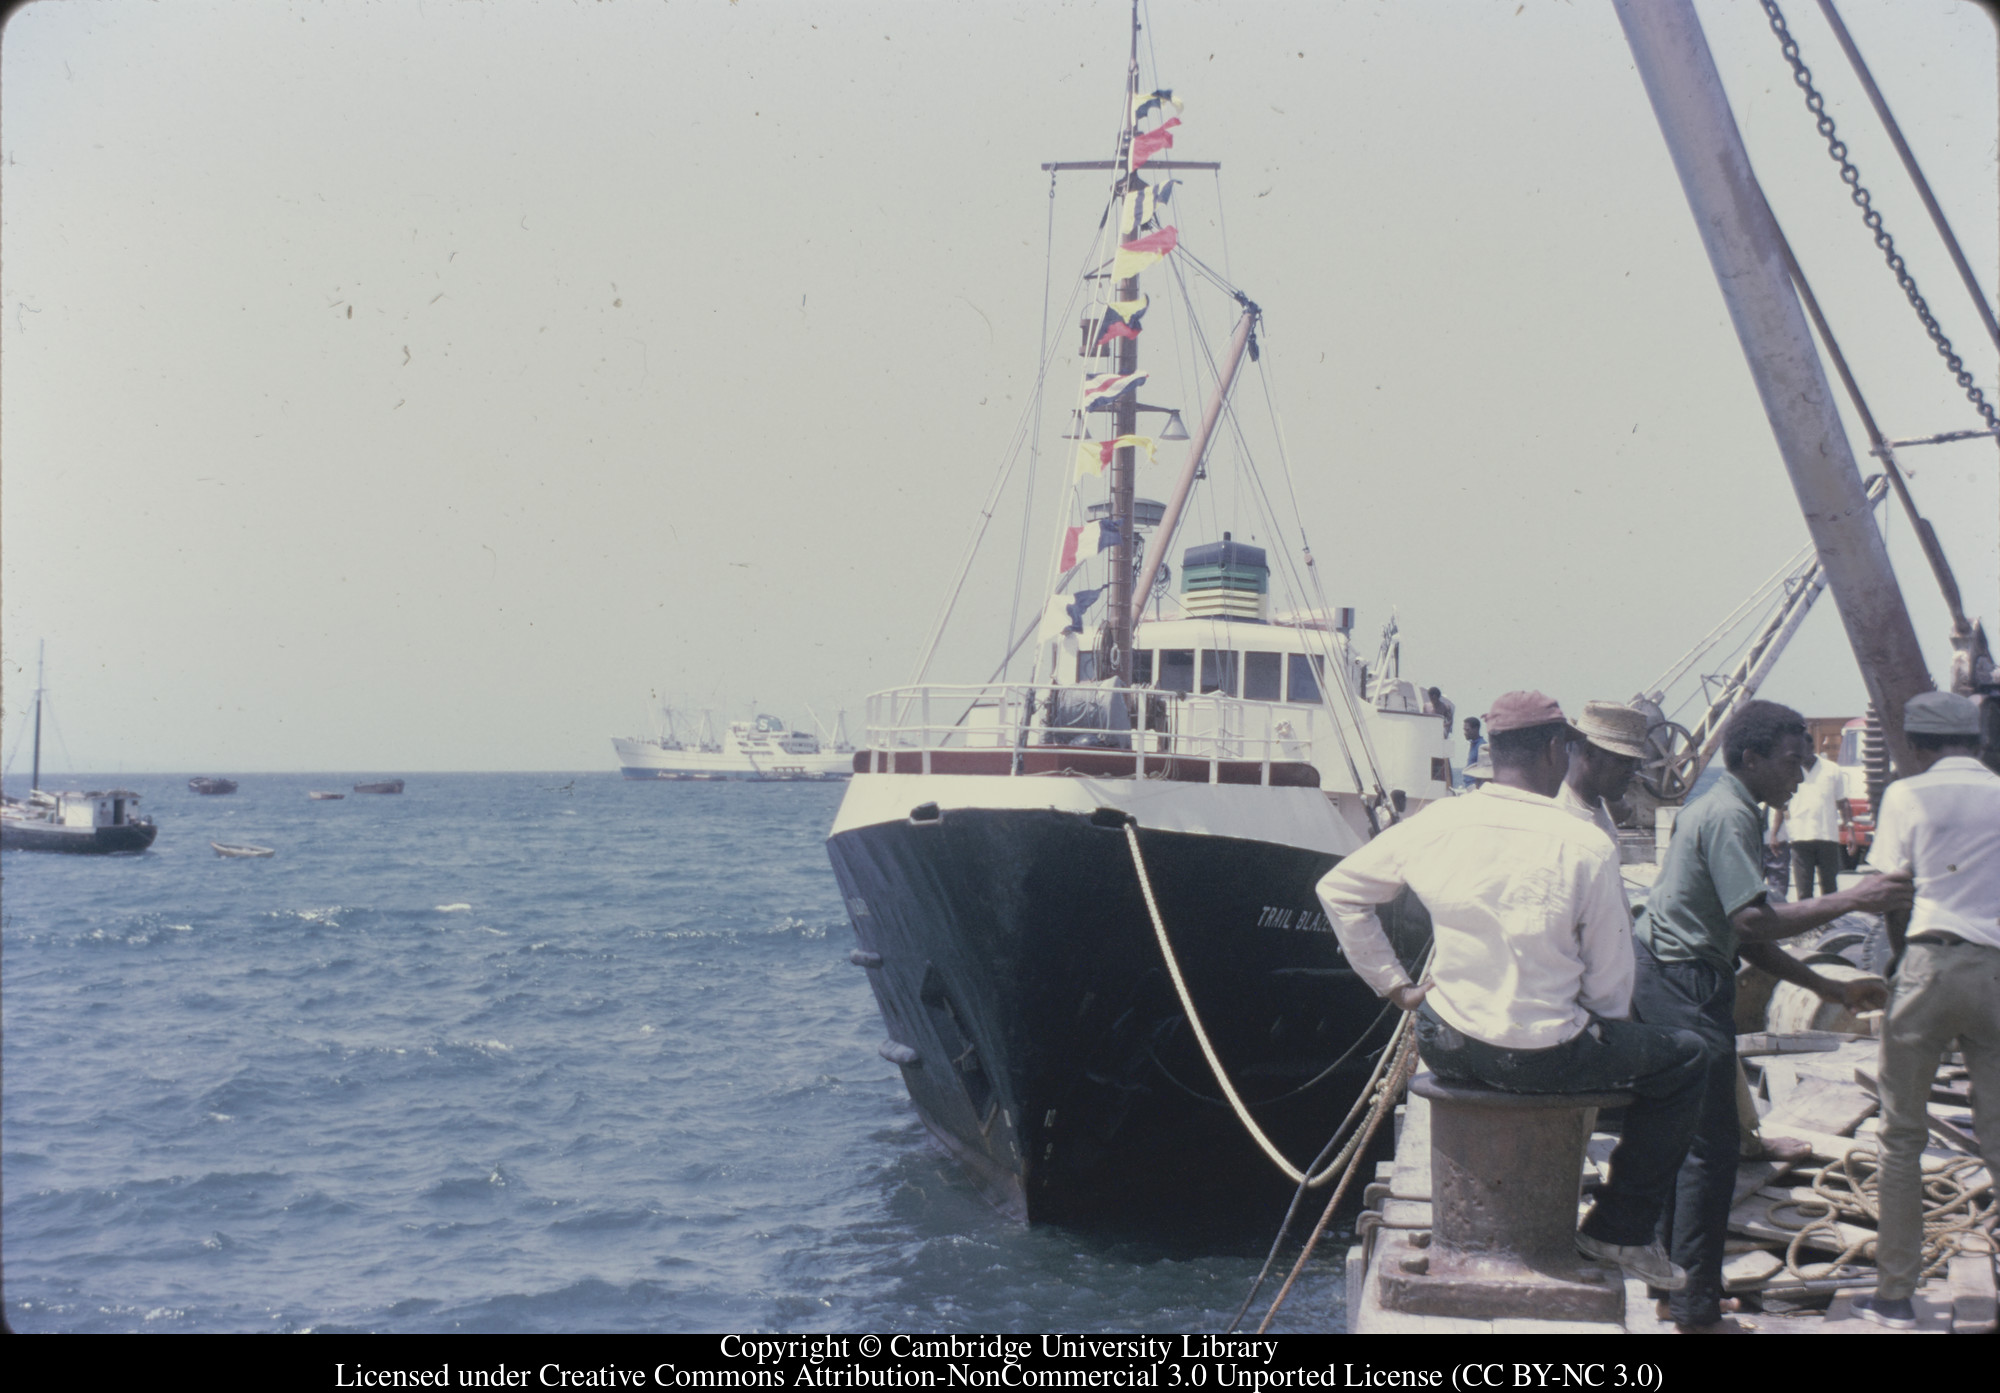 New launch, St Kitts : MV Liamuga, given by UK to replace the sunk Christine, handed over by Marnham 1972, 1972